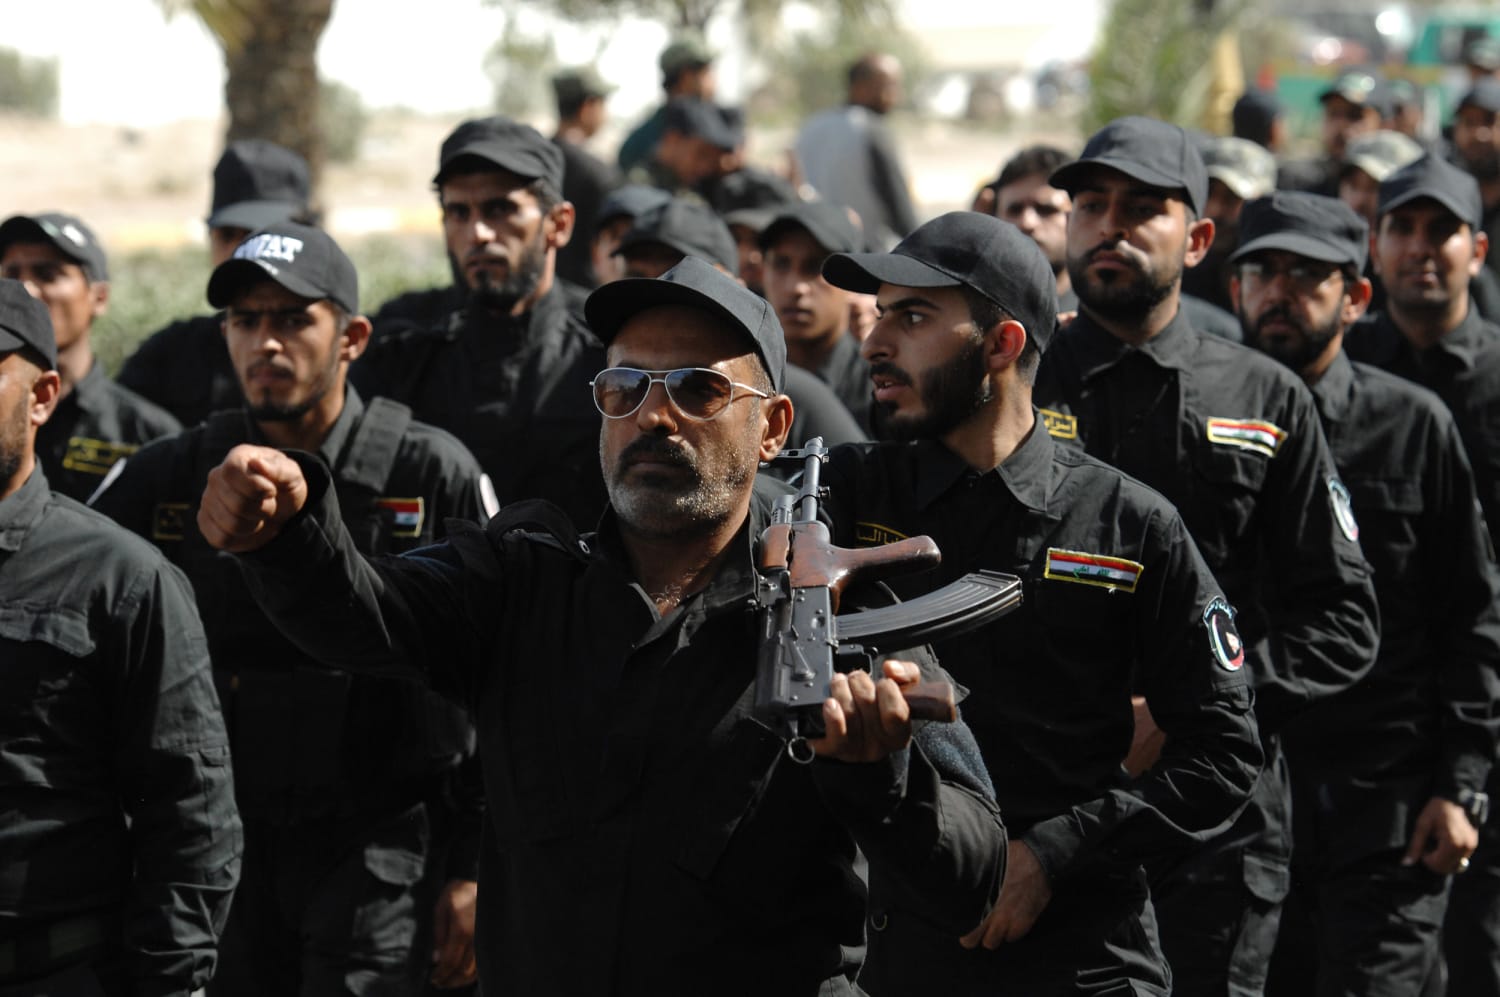 Image: Iraq's Mahdi Army Vows To Fight ISIS In Baghdad March